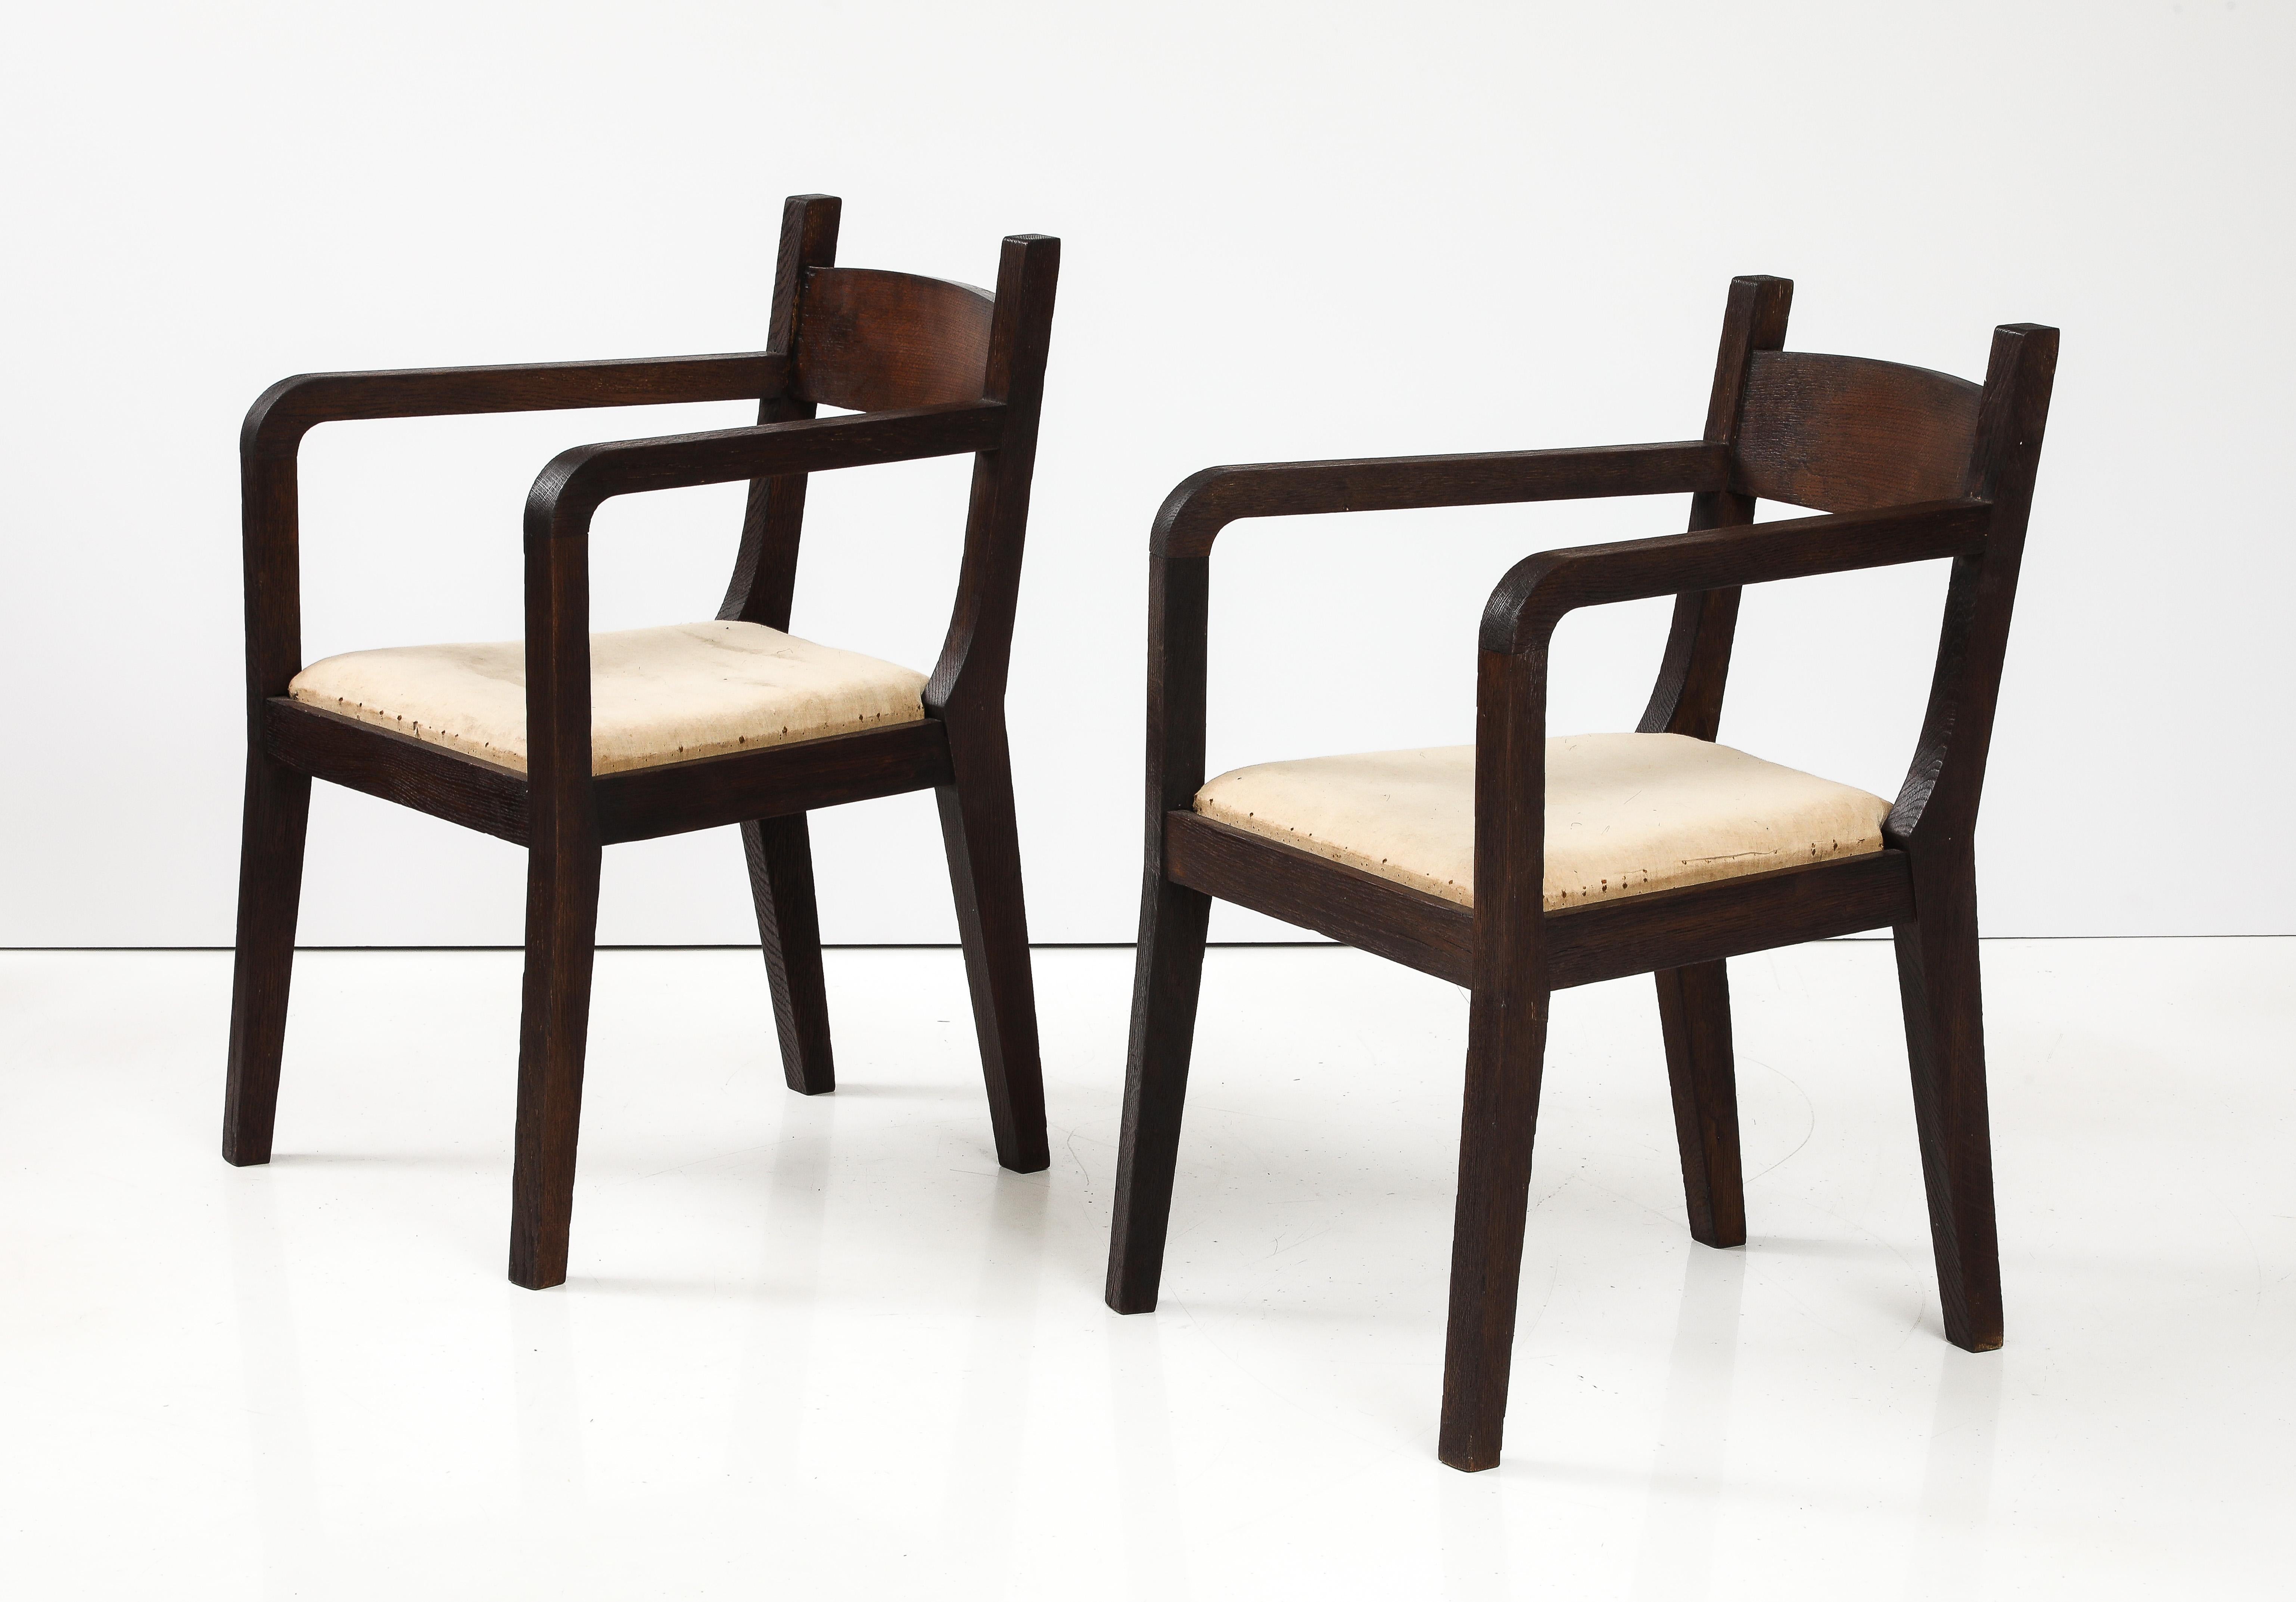 Pair of Modernist Eyre de Lanux Armchairs in Brushed Oak, France, c. 1925 For Sale 4